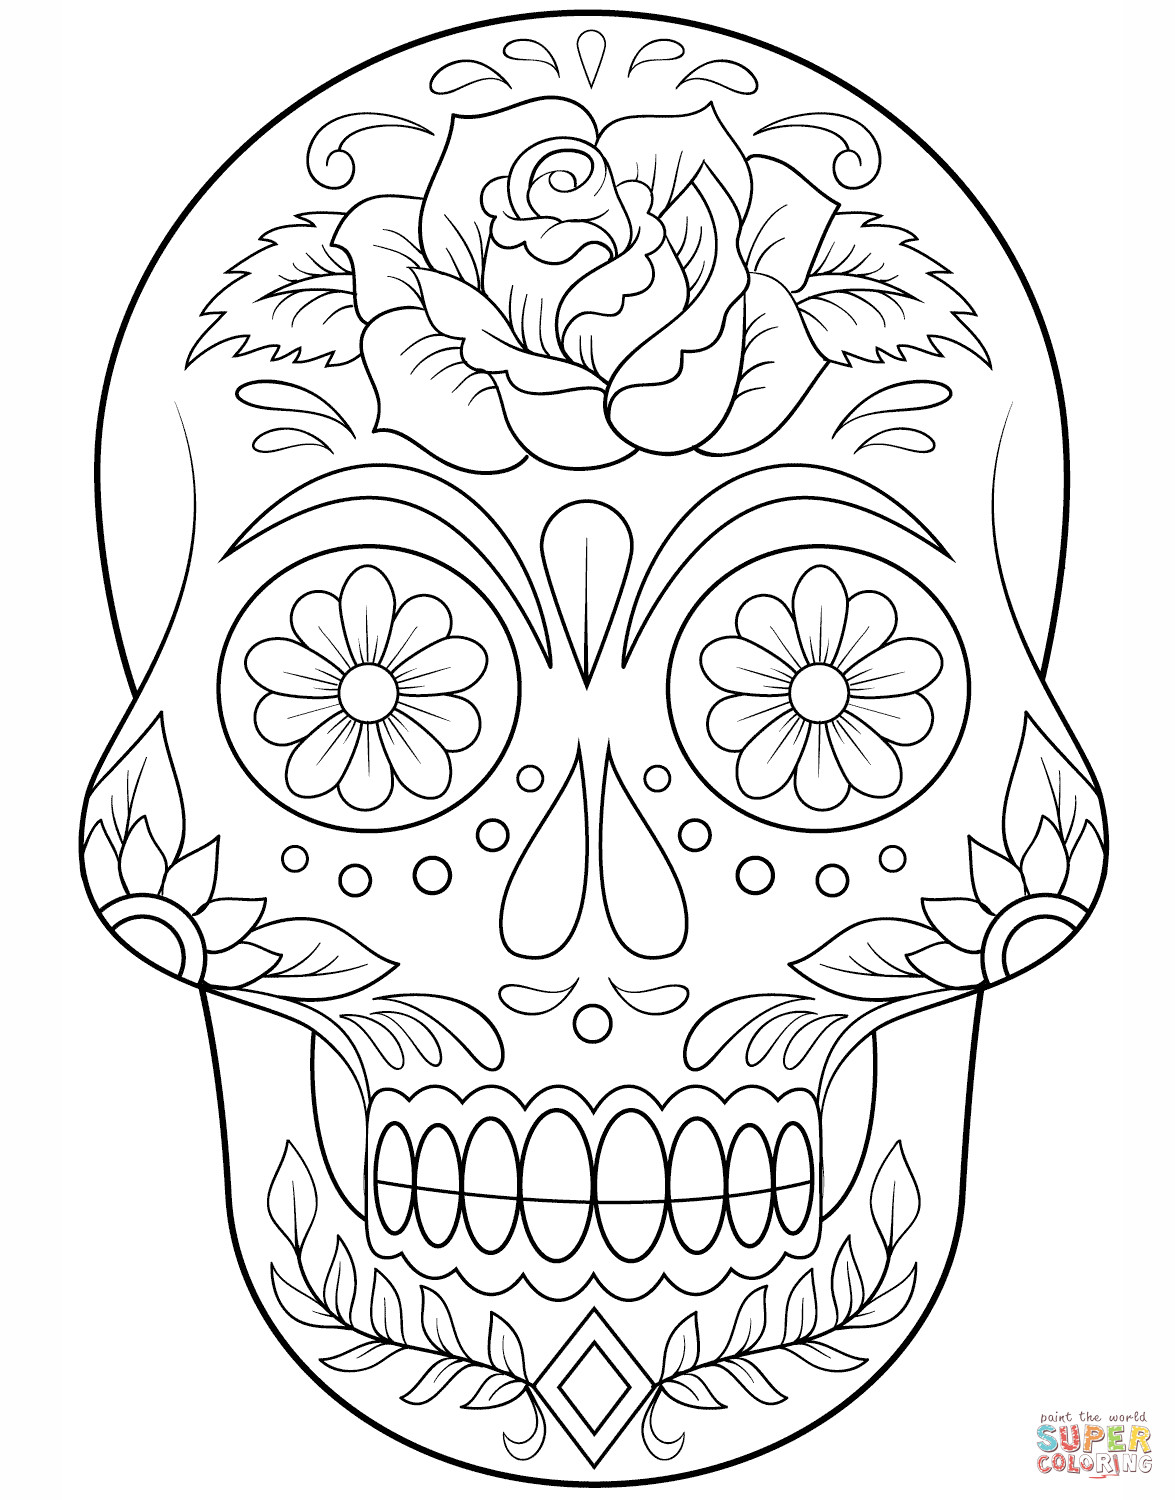 Printable Sugar Skull Coloring Pages
 Sugar Skull with Flowers coloring page